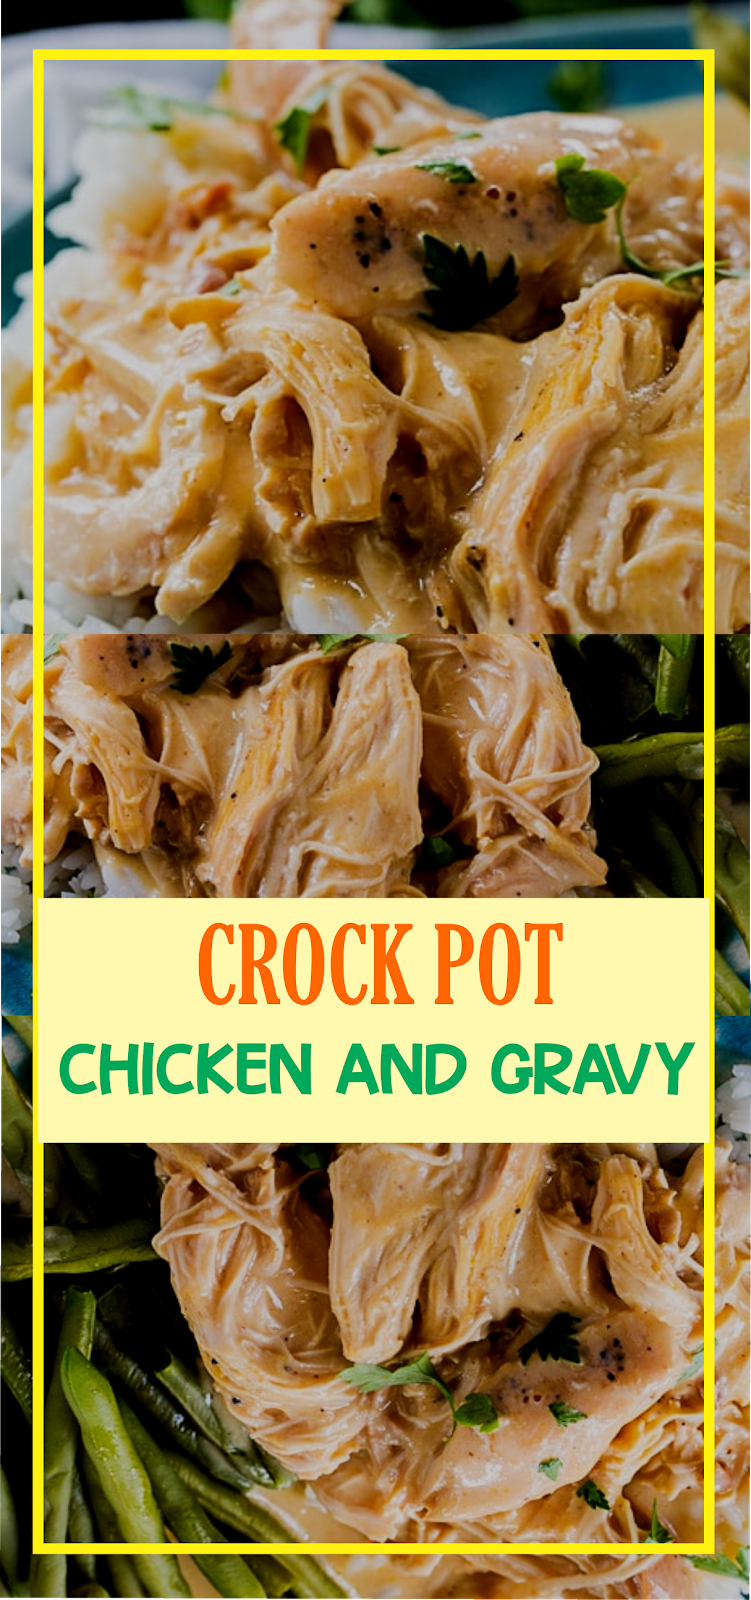 CROCK POT CHICKEN AND GRAVY | Show You Recipes